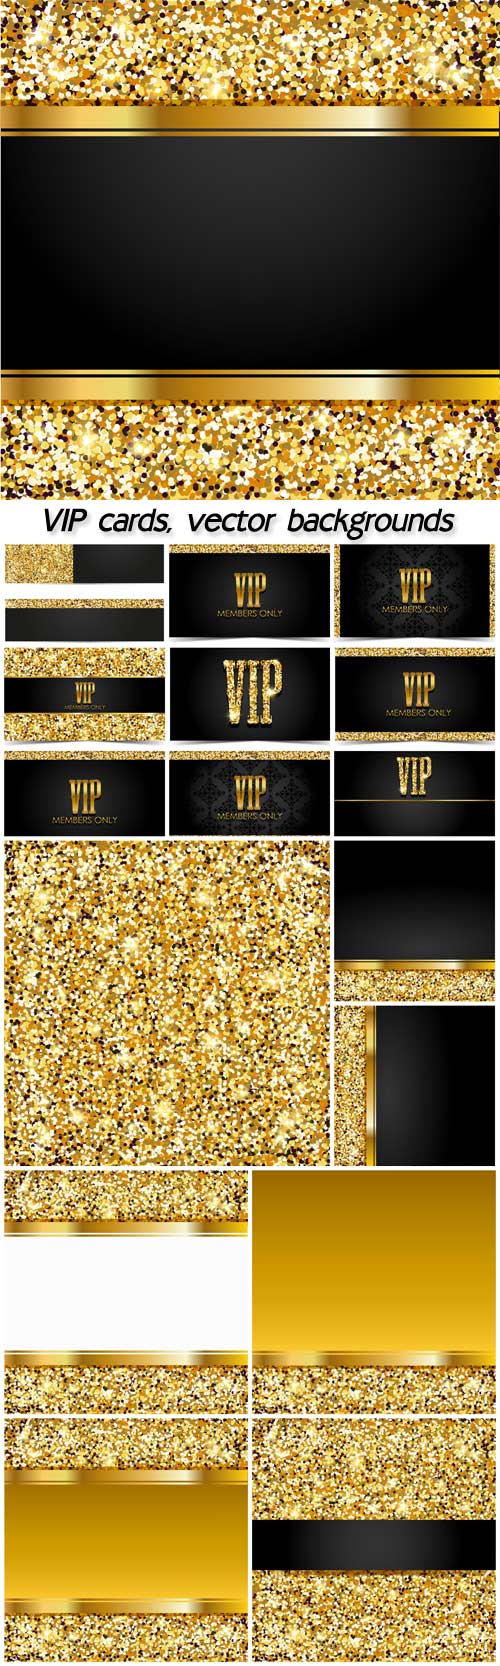 VIP cards, gold vector backgrounds